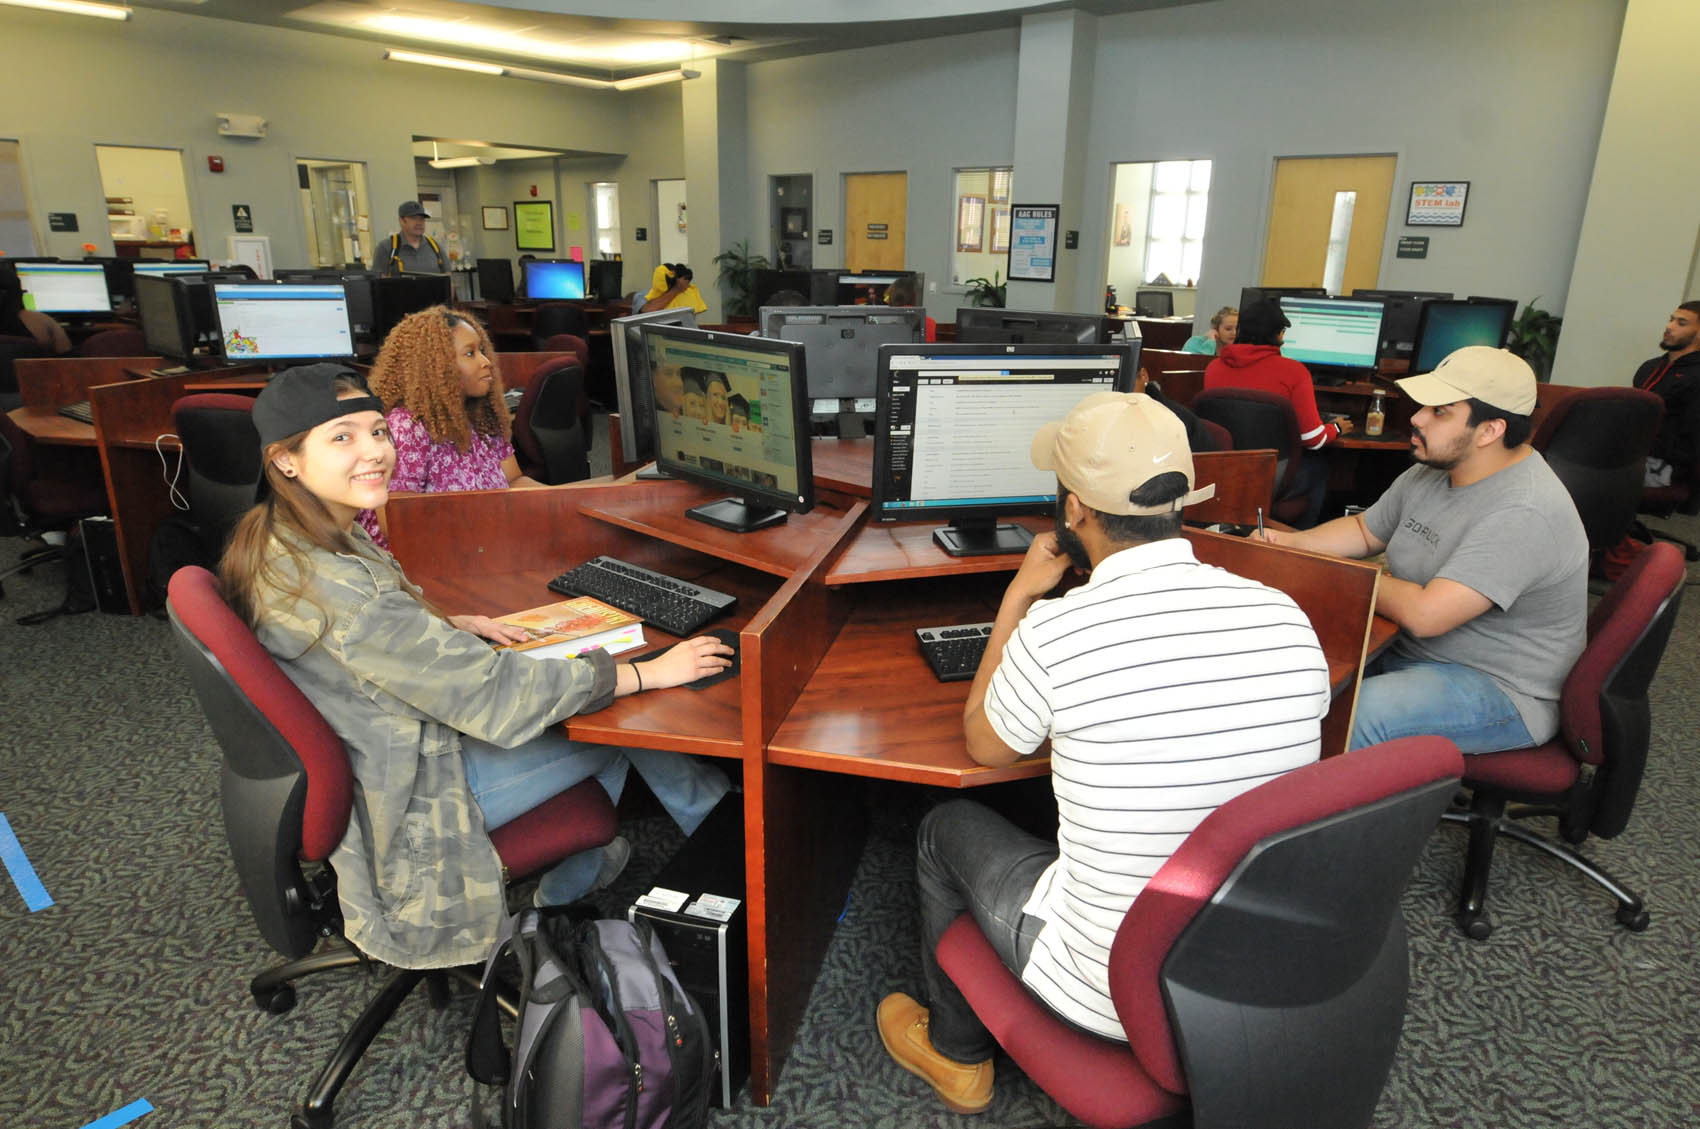 Click to enlarge,  Central Carolina Community College has been ranked 21st among the 50 best online community colleges for 2016-17 by the Center for Online Education. There are 1,108 community colleges currently operating in the U.S., according to American Association of Community Colleges data. For more information on CCCC's Distance Education programs, contact Amanda Carter, Director of the Center for Teaching and Learning, at 919-718-7515 or by email at abcarter@cccc.edu. 